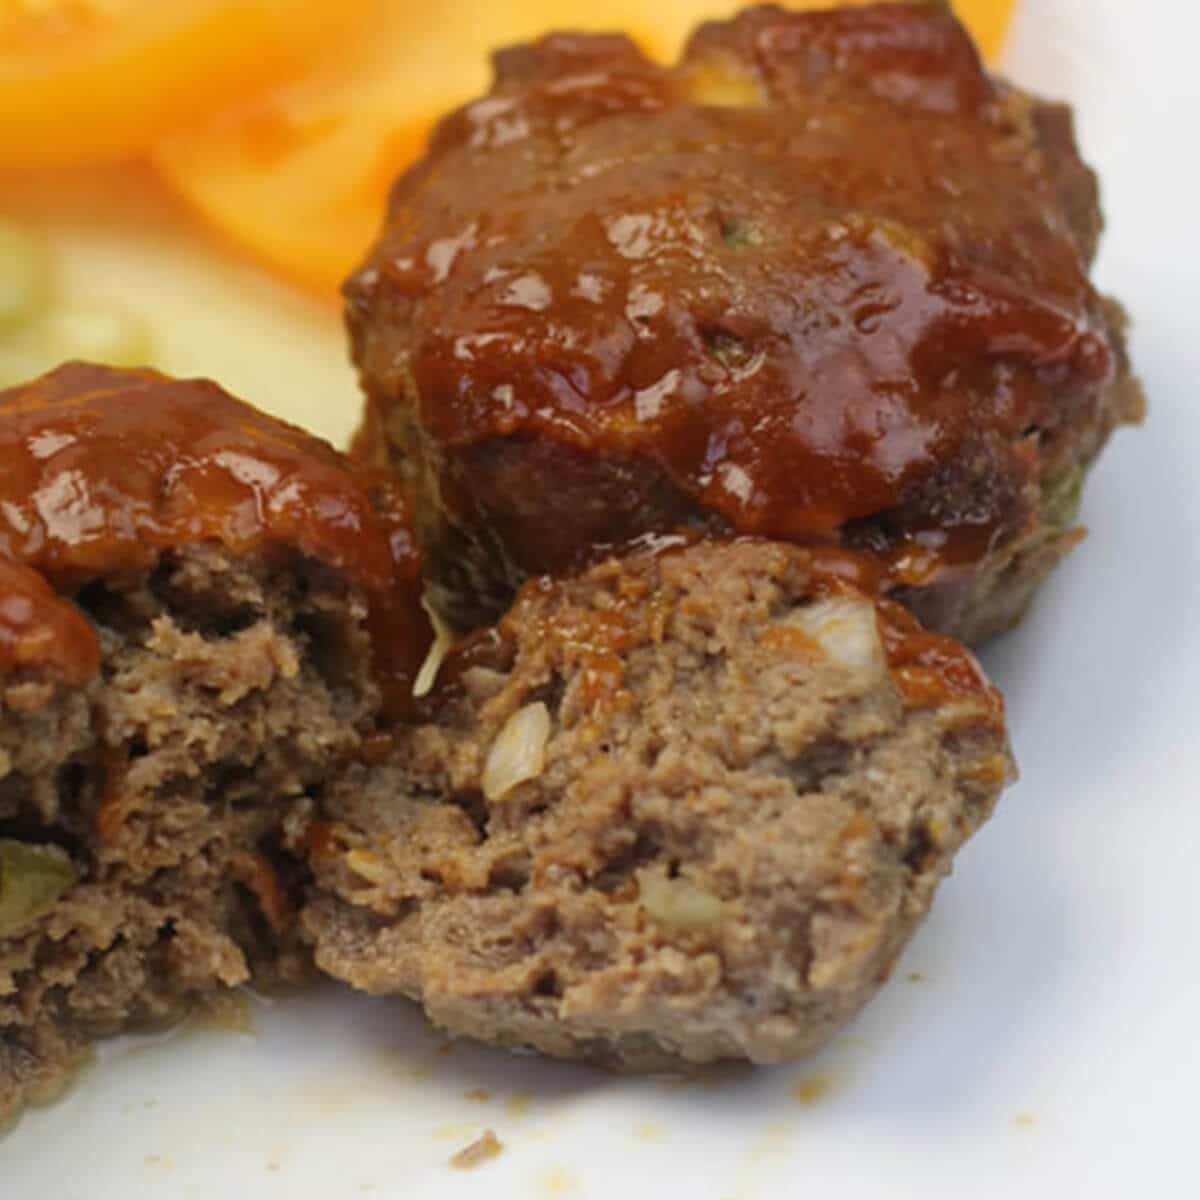 https://southernfoodandfun.com/wp-content/uploads/2020/06/meatloaf-muffins-feature-1200.jpg